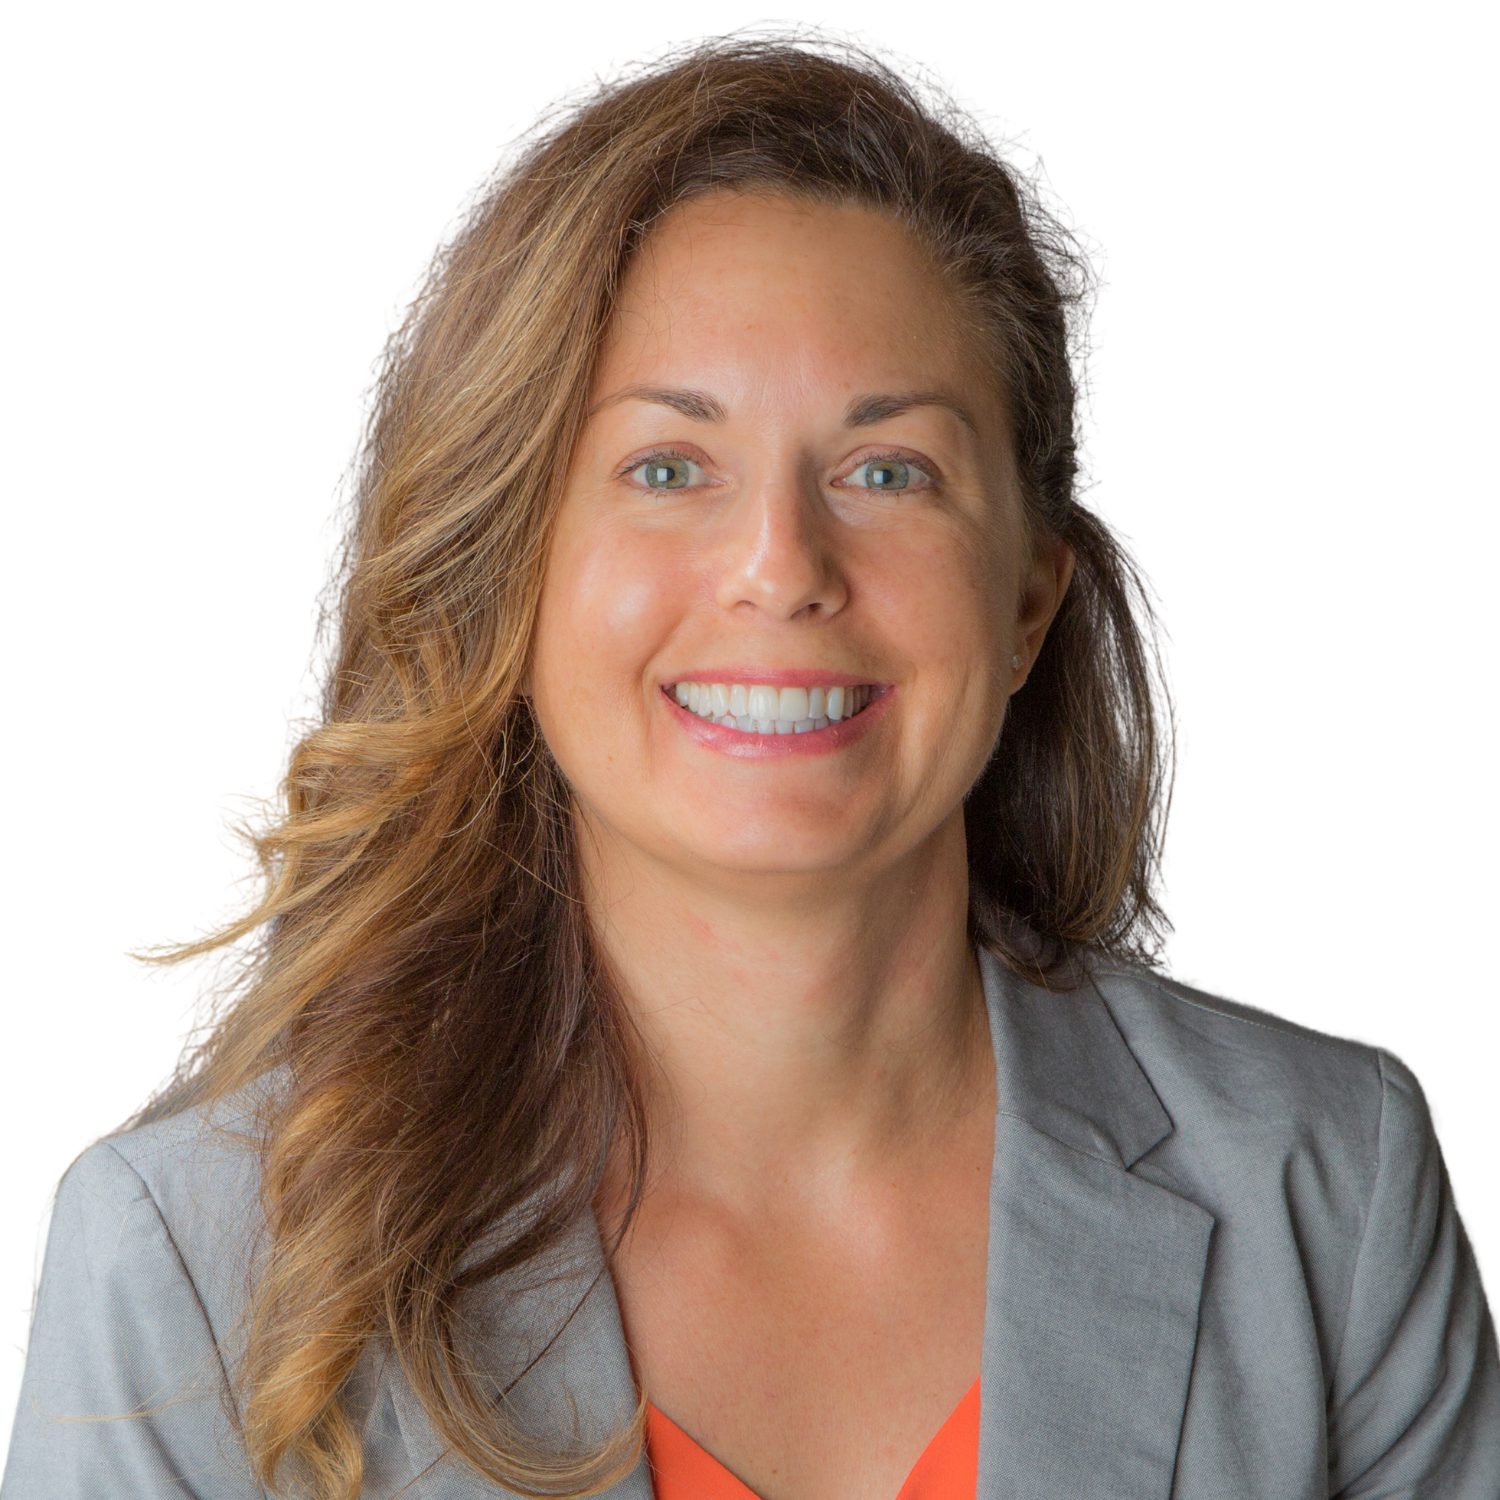 White woman with brown hair, orange shirt and gray suit